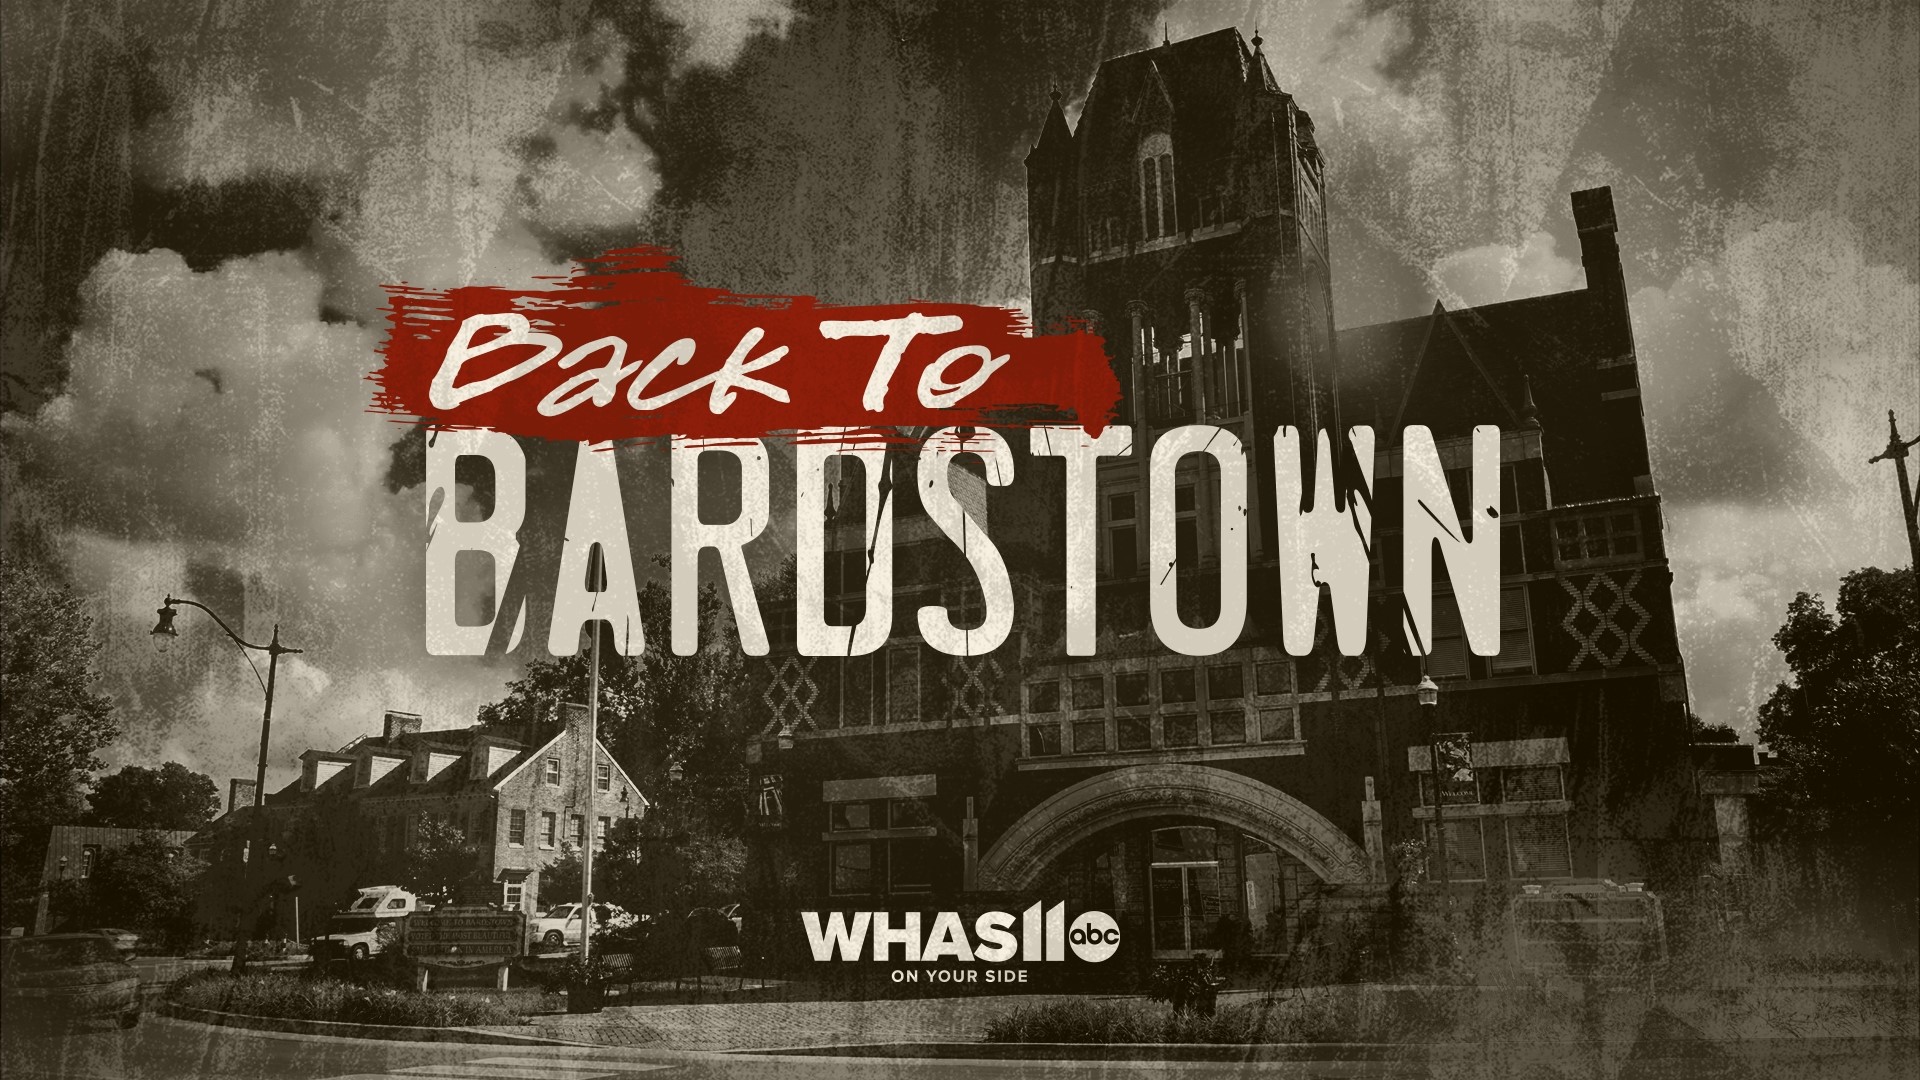 This season, Shay McAlister takes us back to Bardstown, Ky. where shocking arrests and new developments in one unsolved case have bled into the other cases.